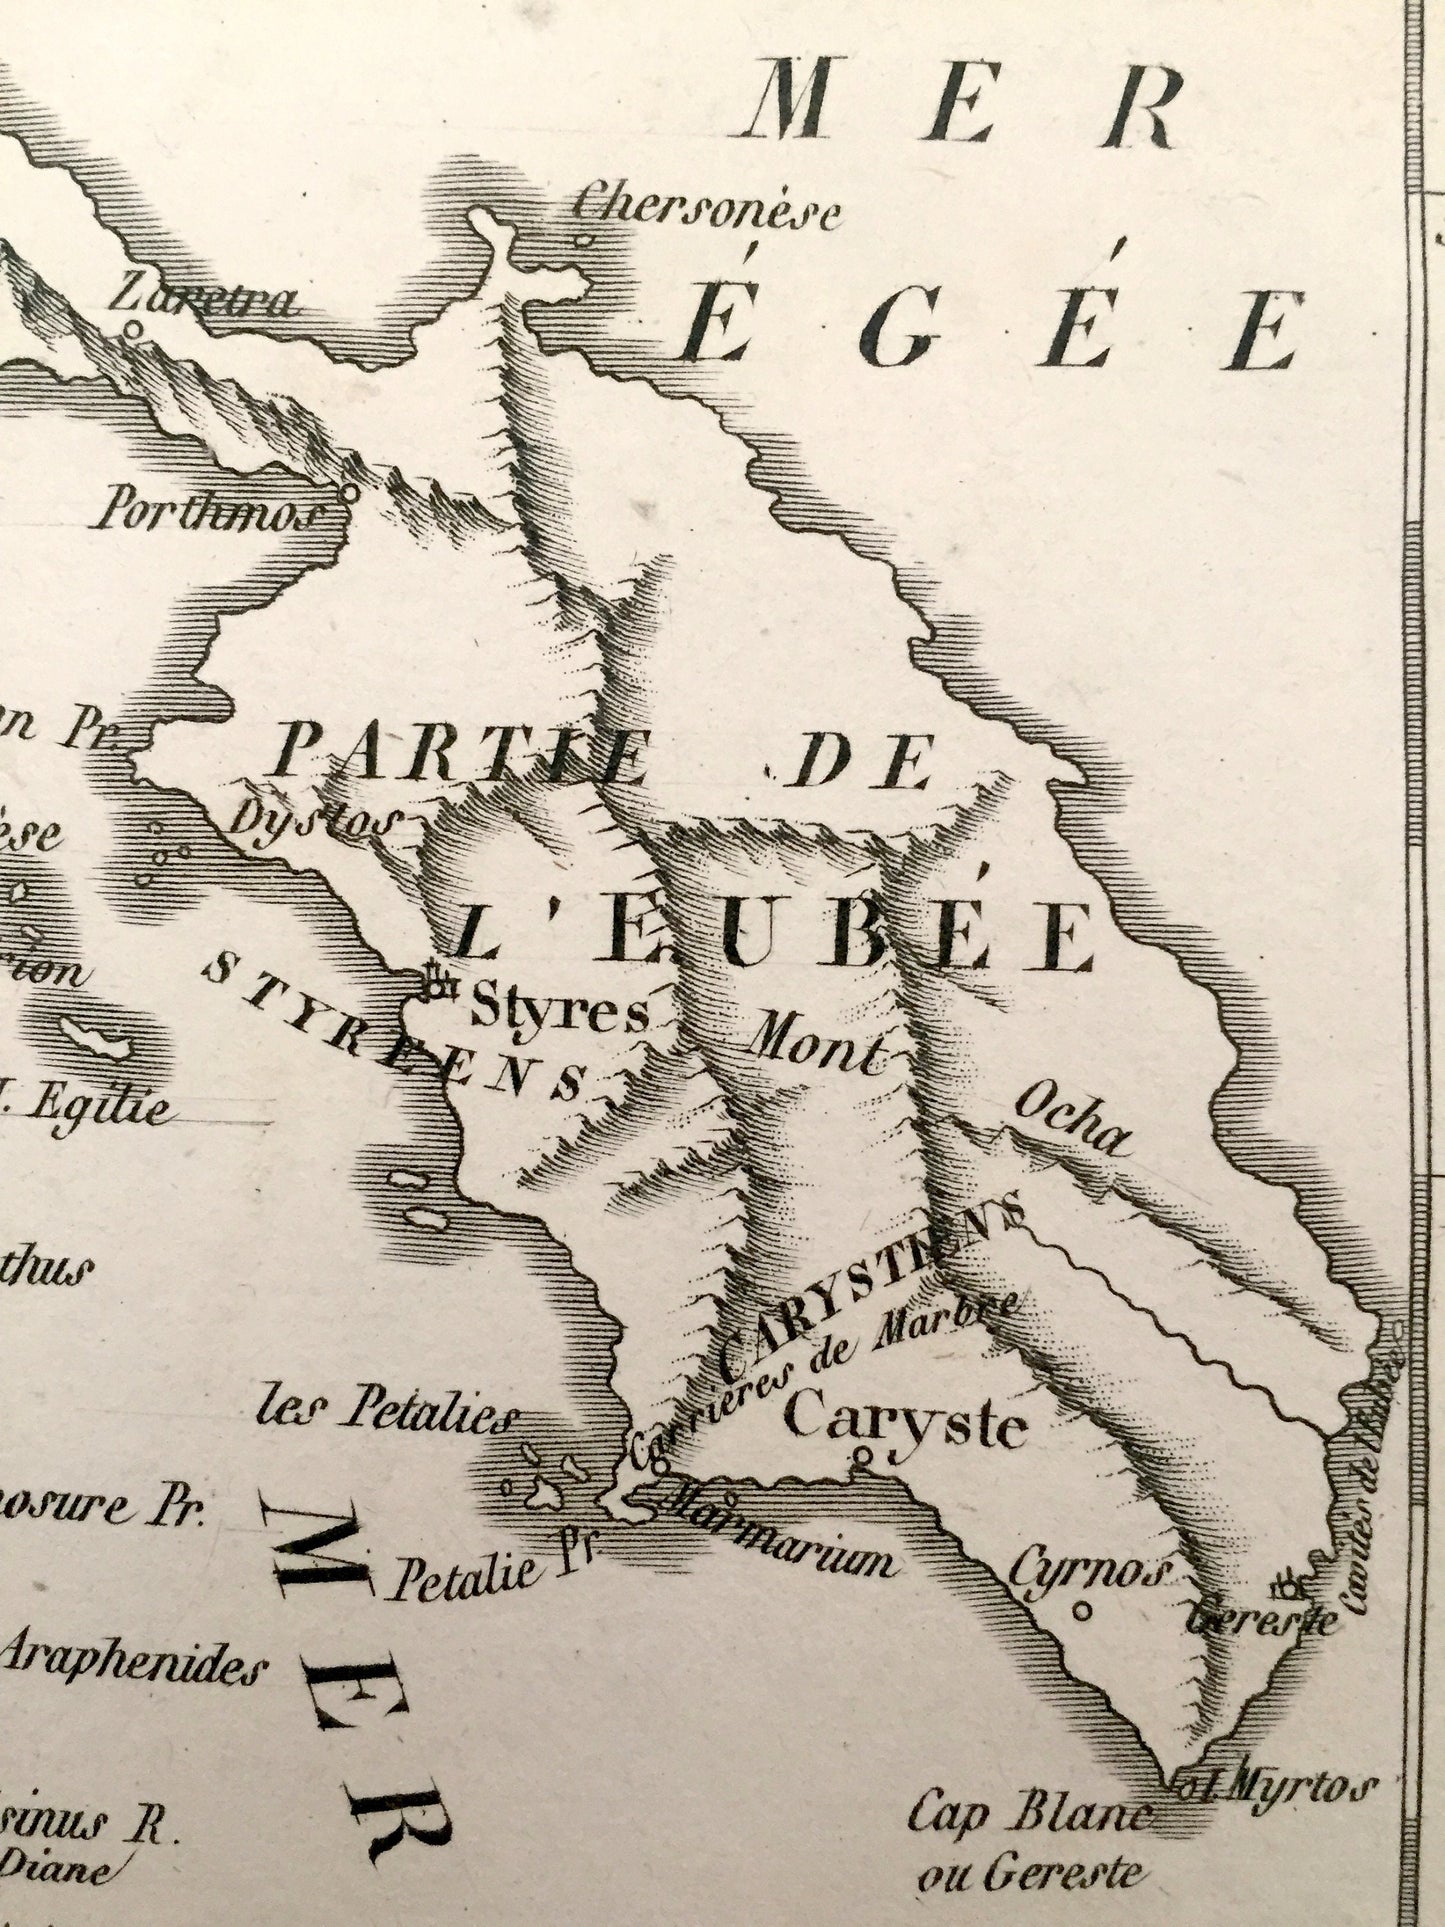 Antique 1821 Greece Map from Atlas from Barthélemy's Voyage of Anacharsis by Barbie du Bocage  – Athens, Cyclades Islands, Corinthia, Kea